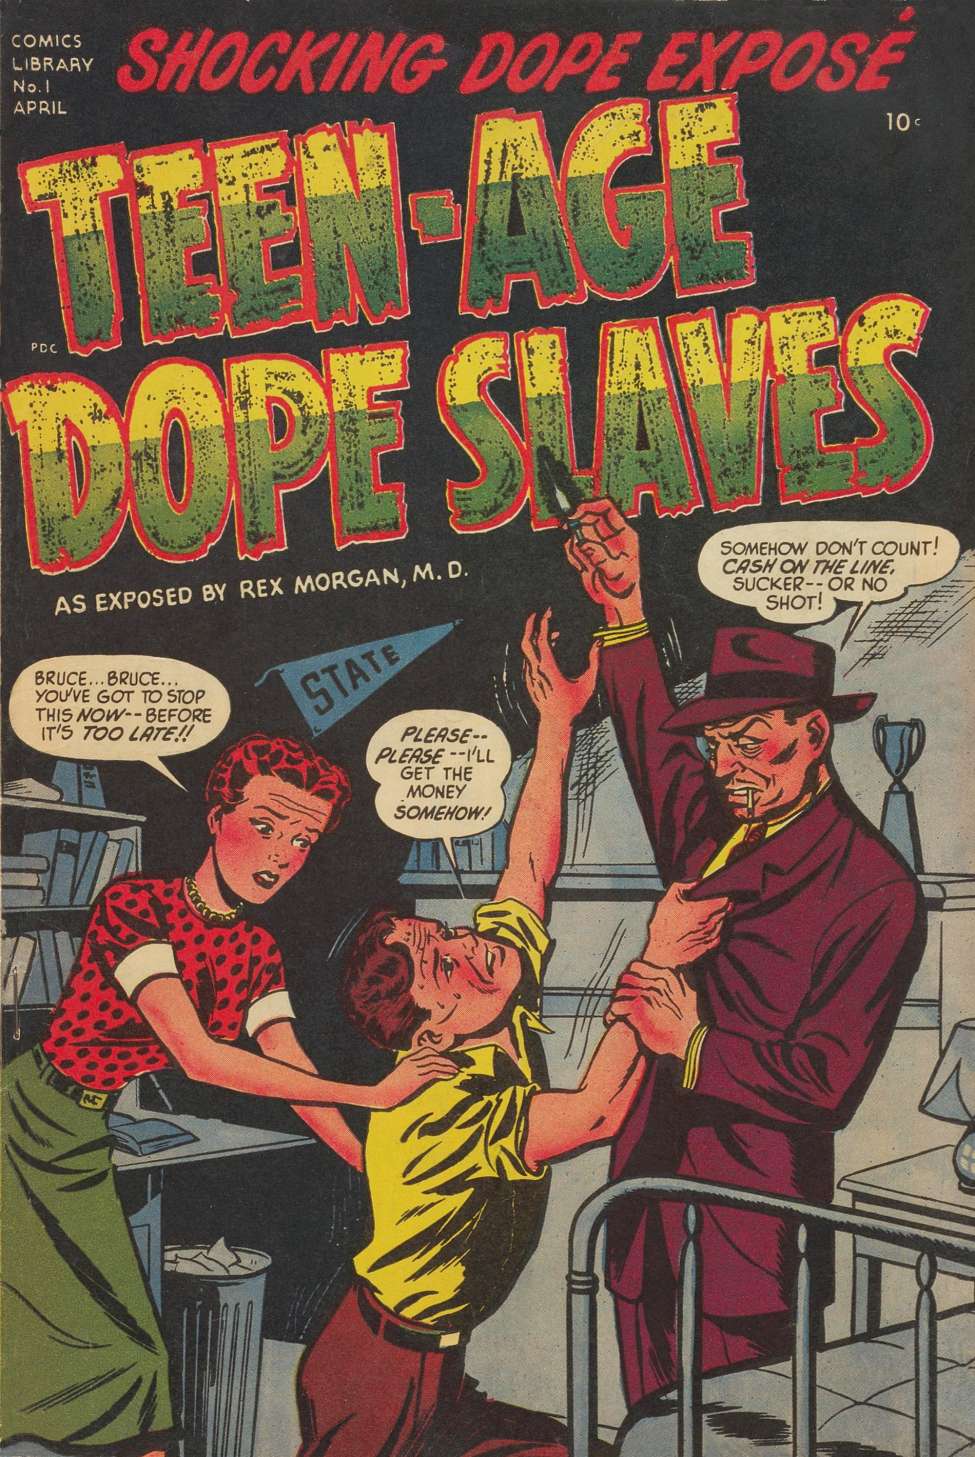 Book Cover For Harvey Comics Library 1 - Teen-Age Dope Slaves